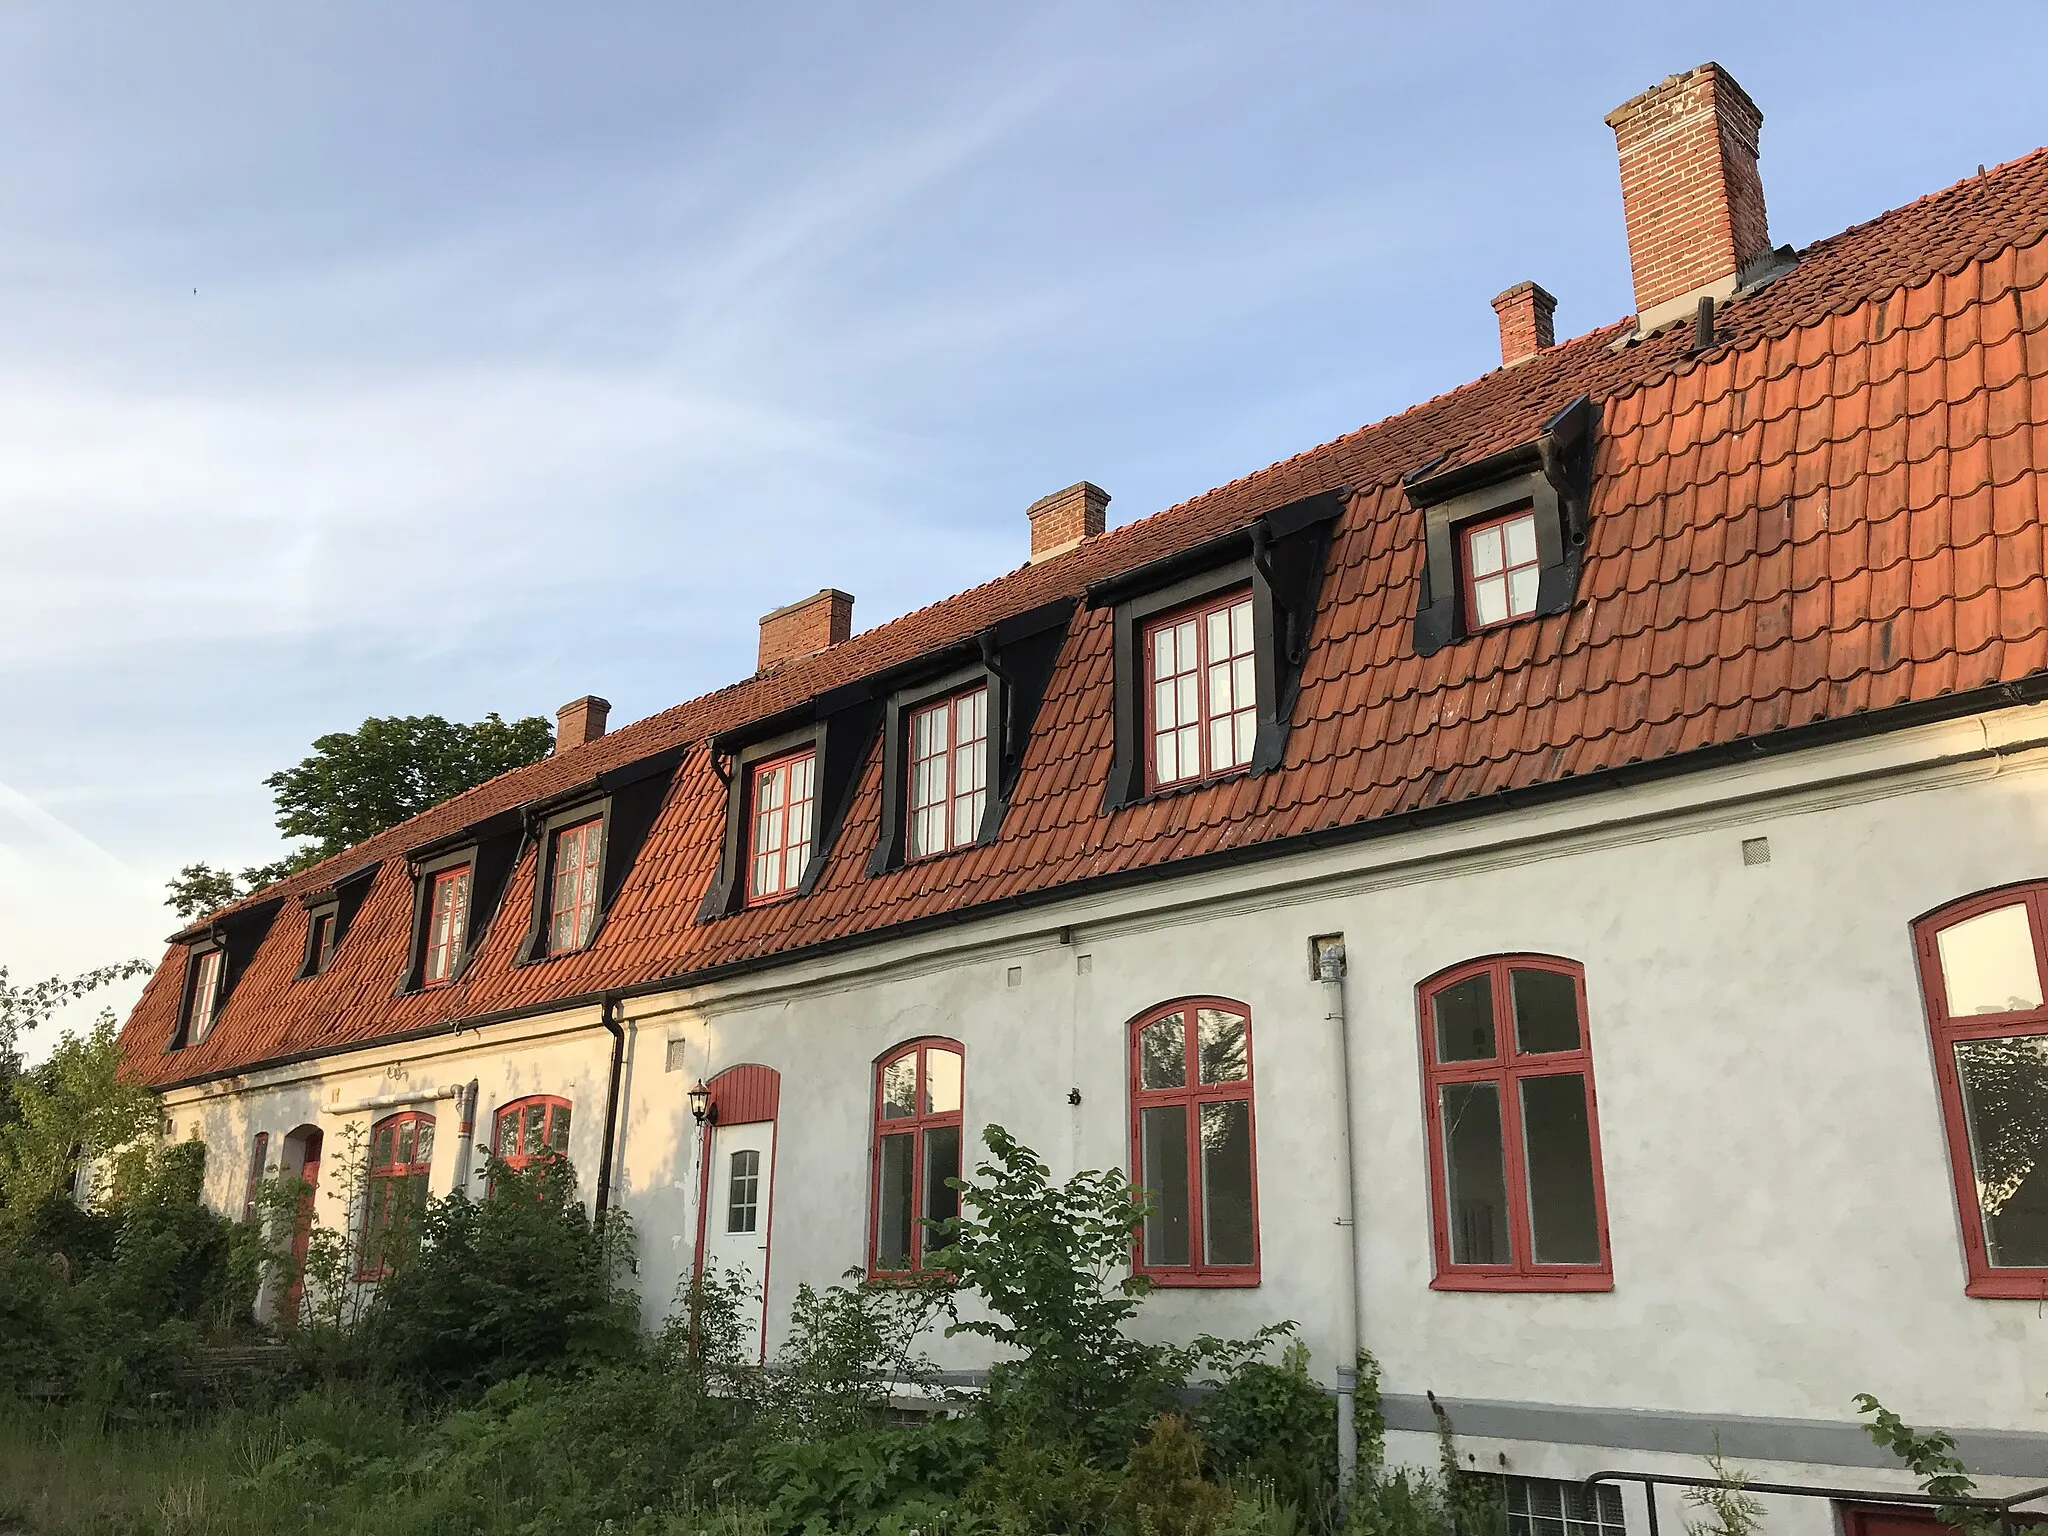 Photo showing: The former Marieholm Inn (gästgivaregård) in Marieholm in Sweden seen from the garden, on May 24, 2019.